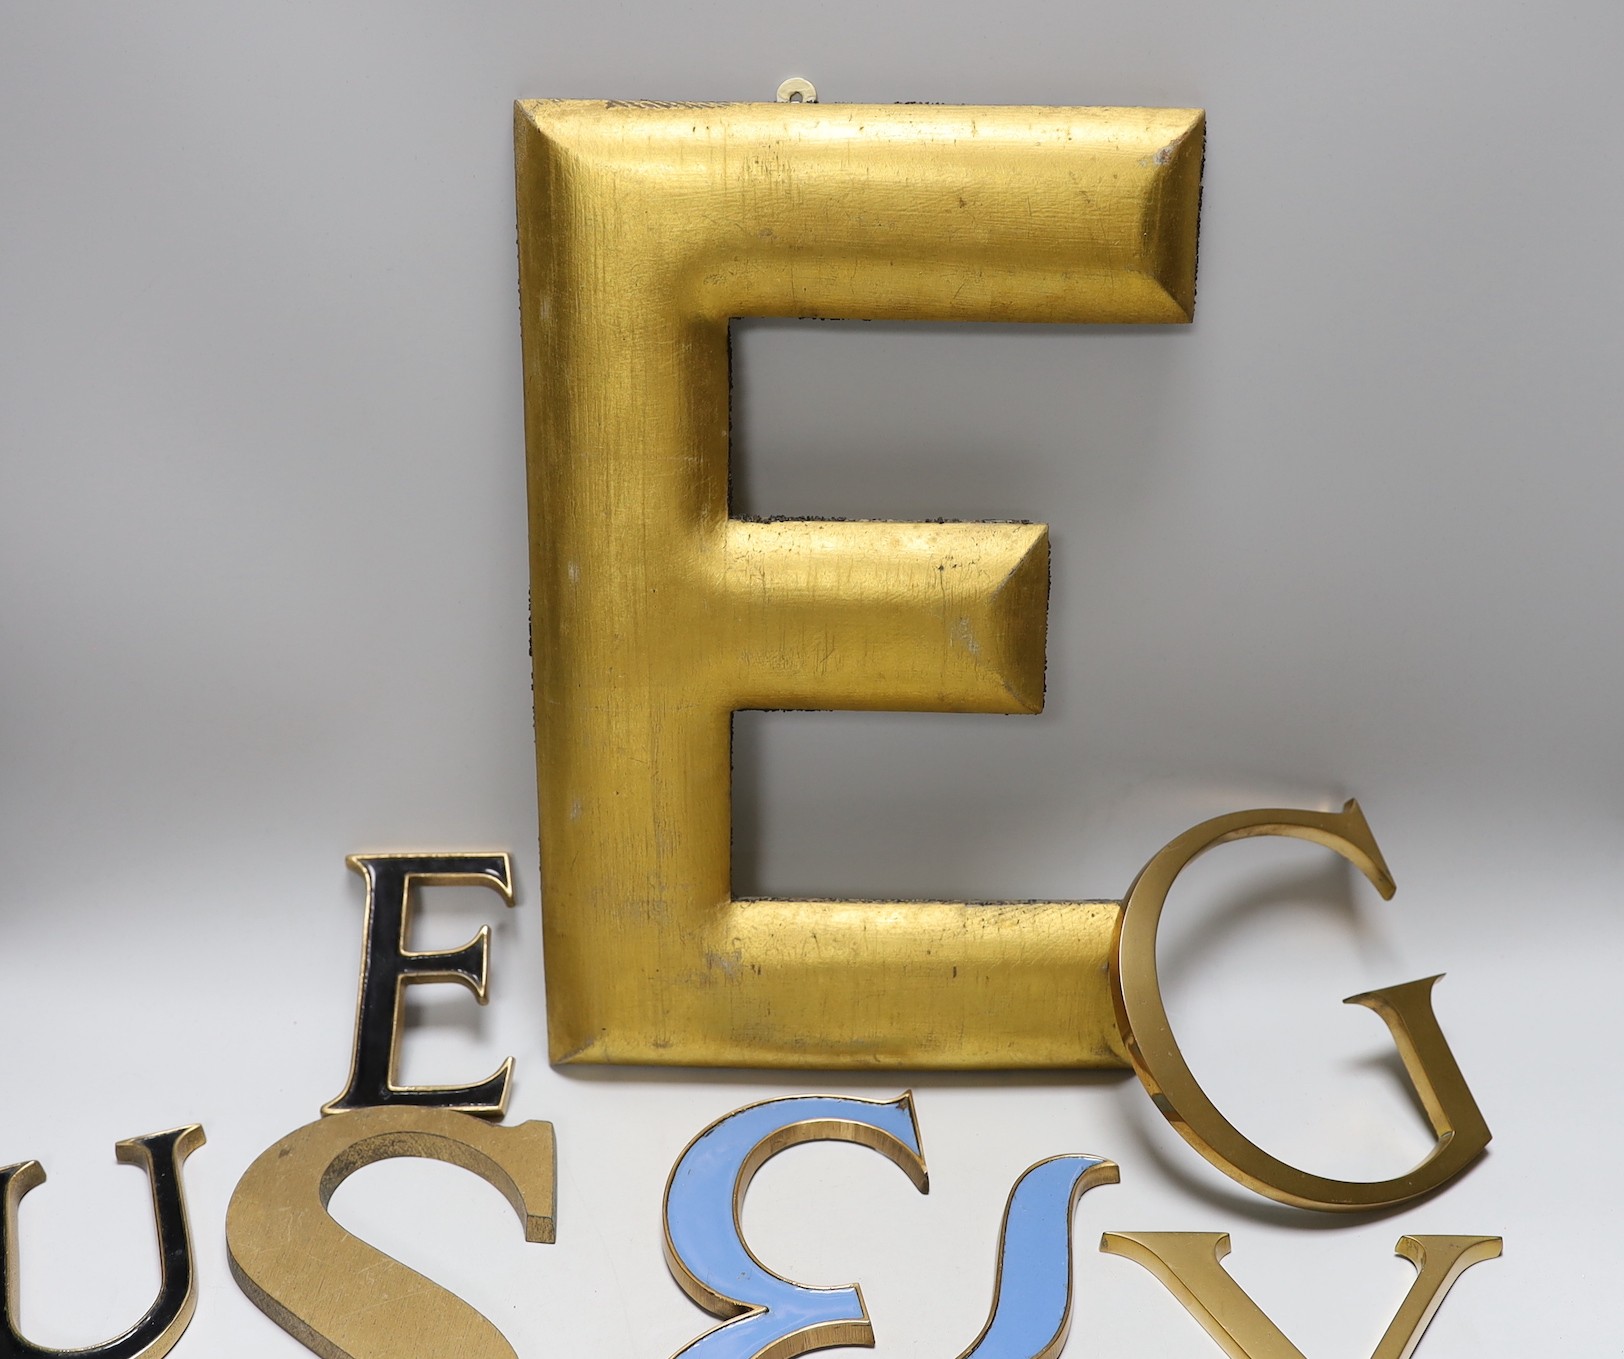 A collection of brass and enamelled lettering of varying sizes and fonts